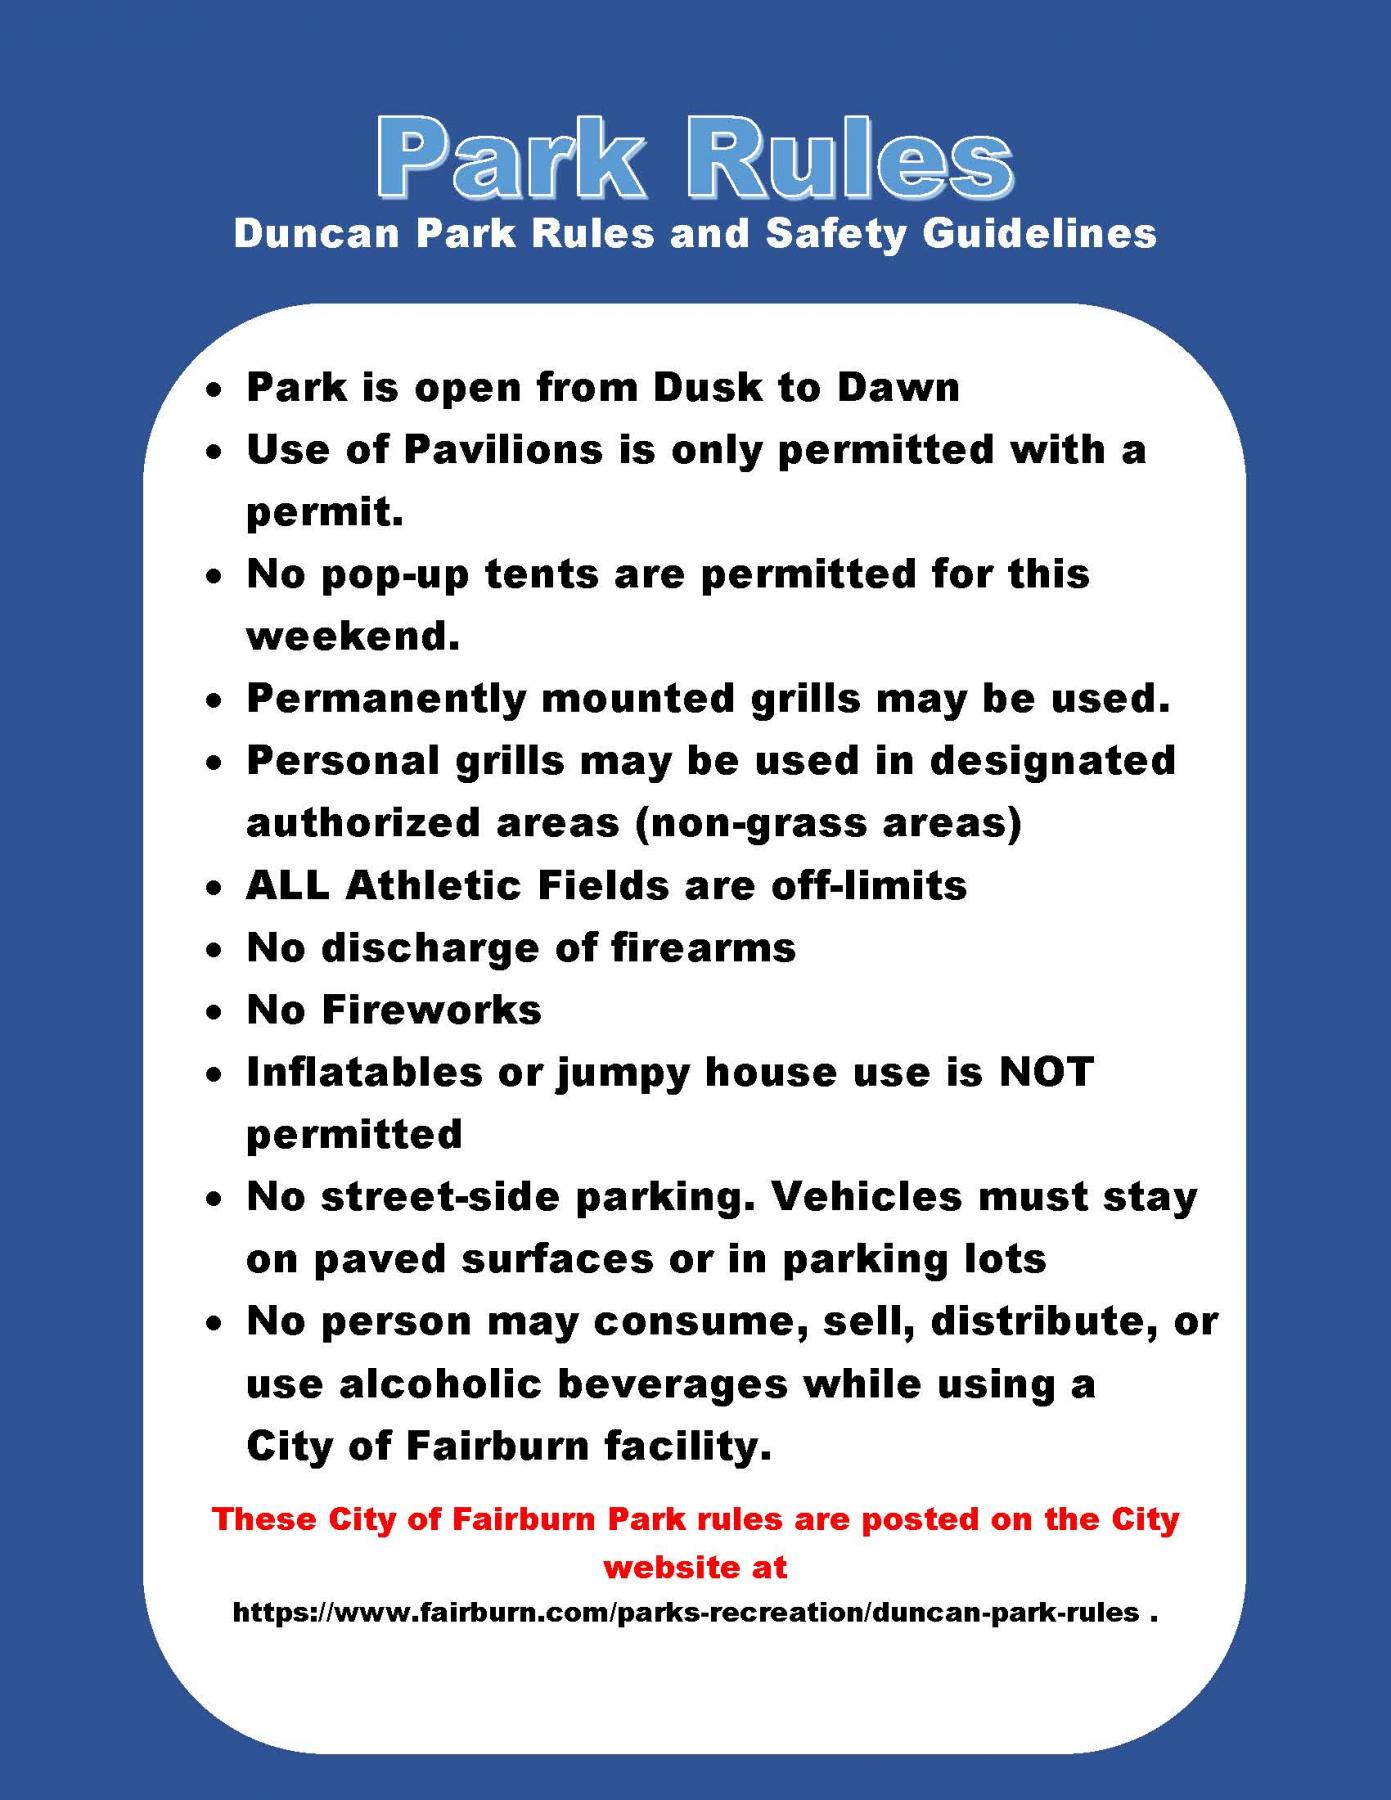 Park Rules for the 4th of July